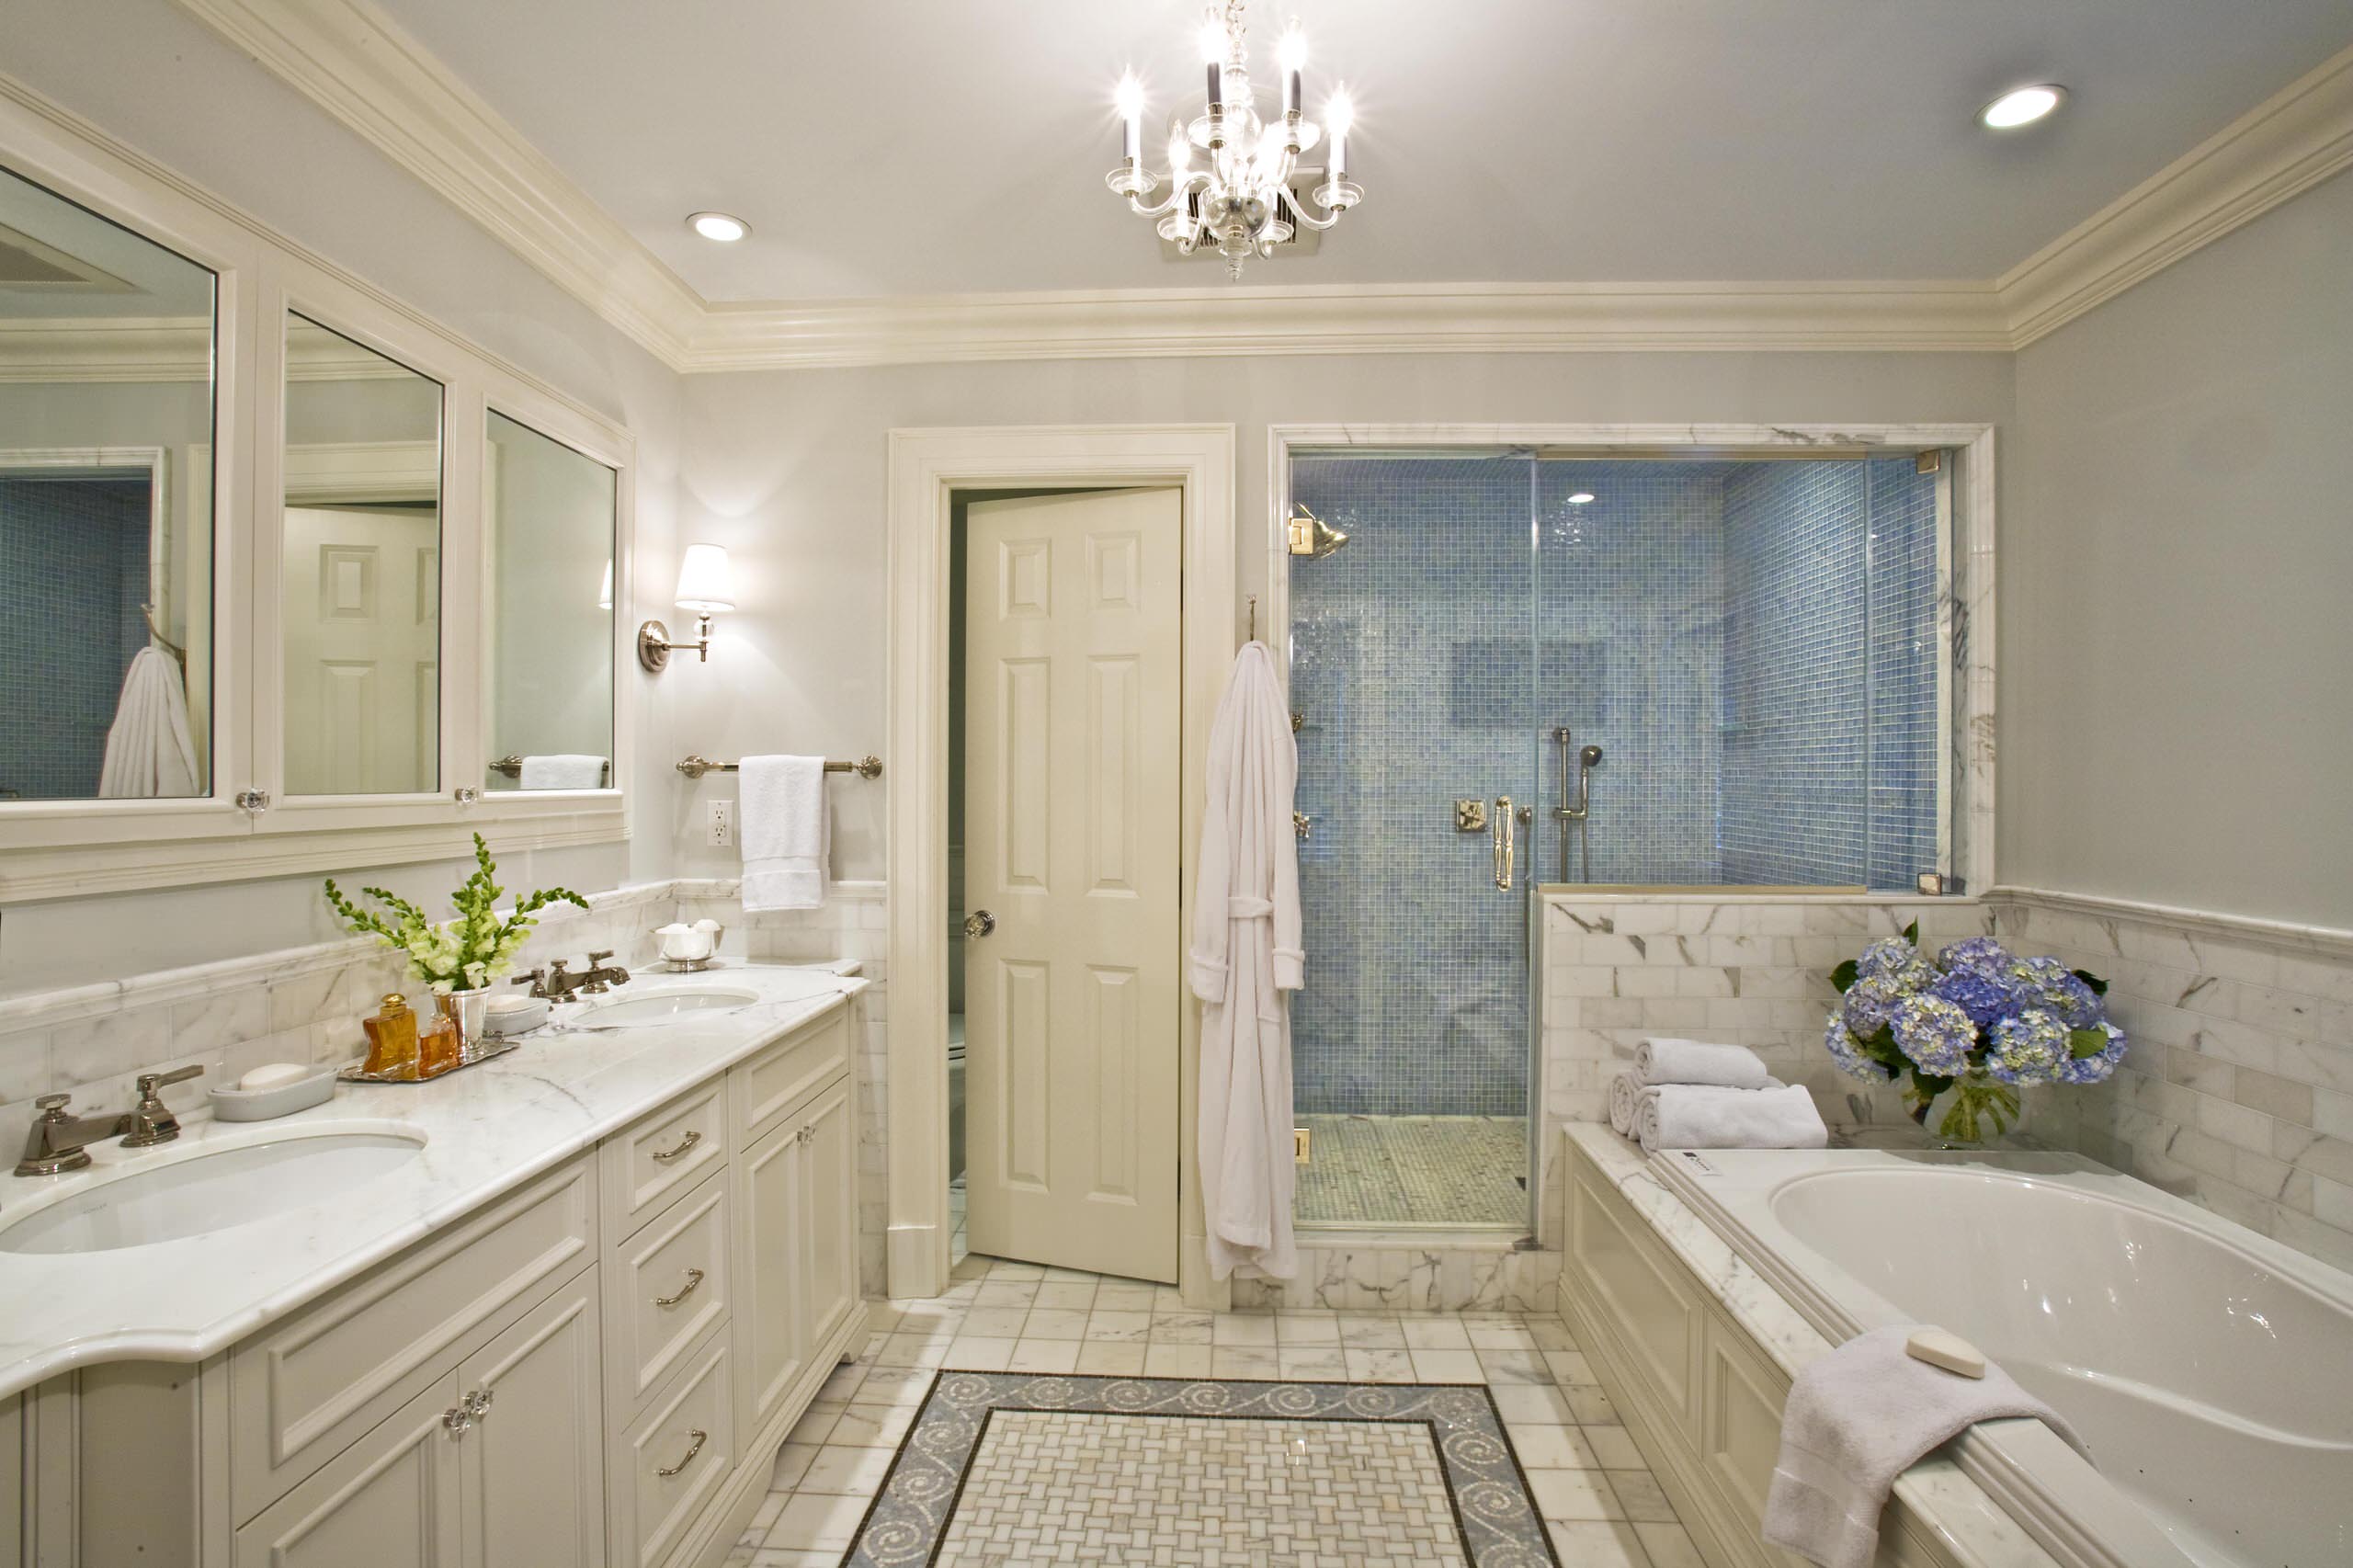 https://st.hzcdn.com/simgs/pictures/bathrooms/master-bath-gustavson-dundes-architecture-and-design-llp-img~82c155320f3fffb0_14-1801-1-1f4e948.jpg